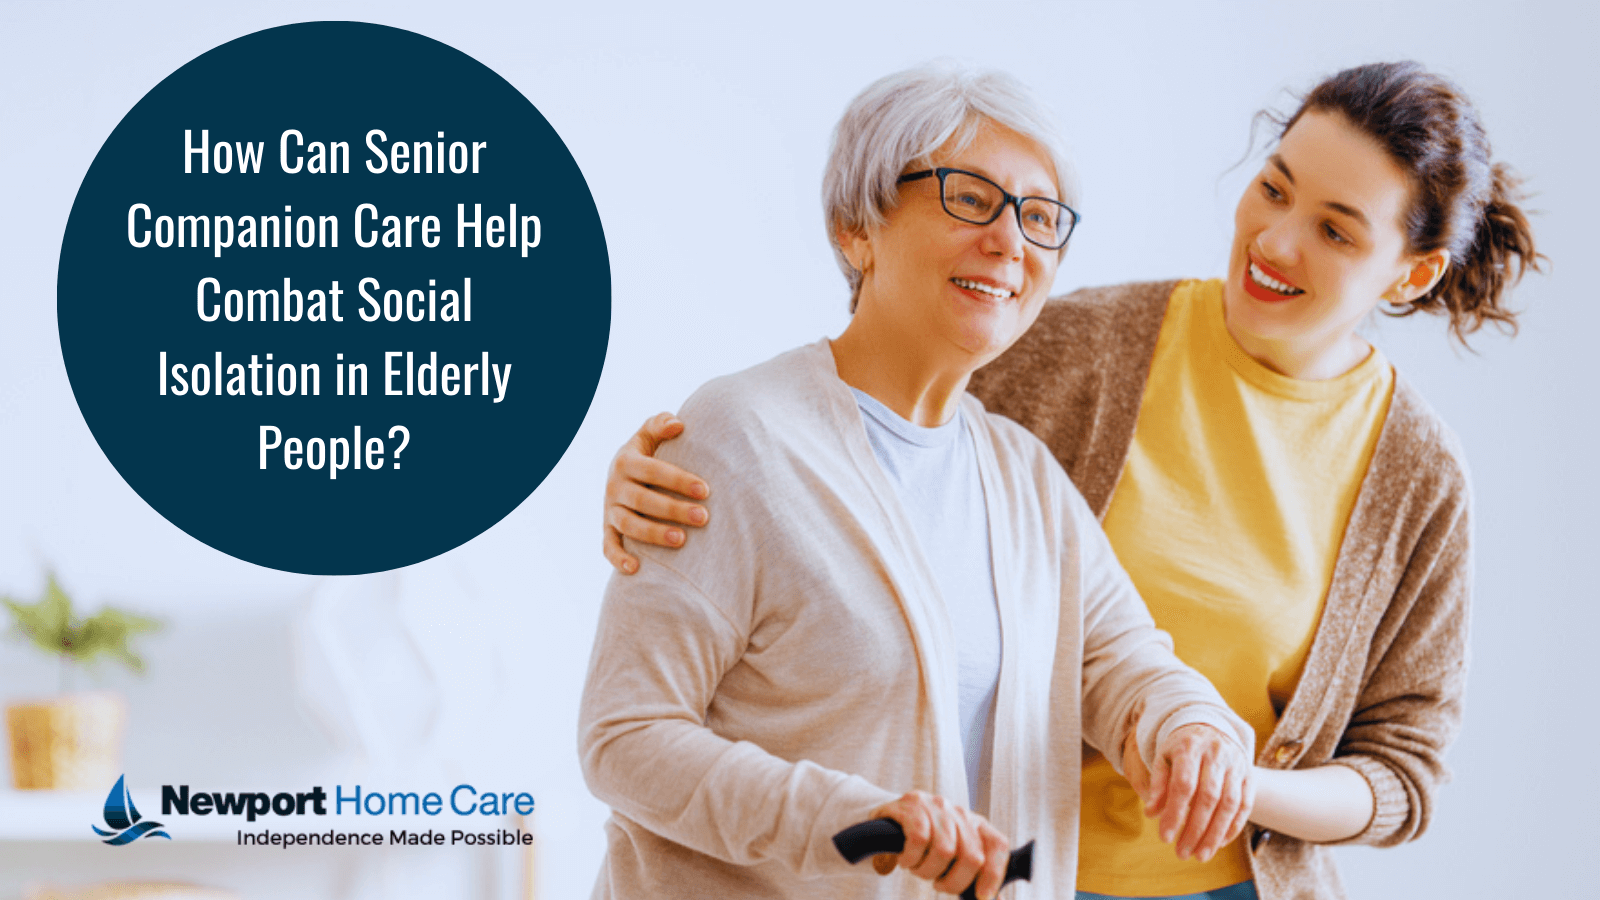 How Can Senior Companion Care Help Combat Social Isolation in Elderly People?